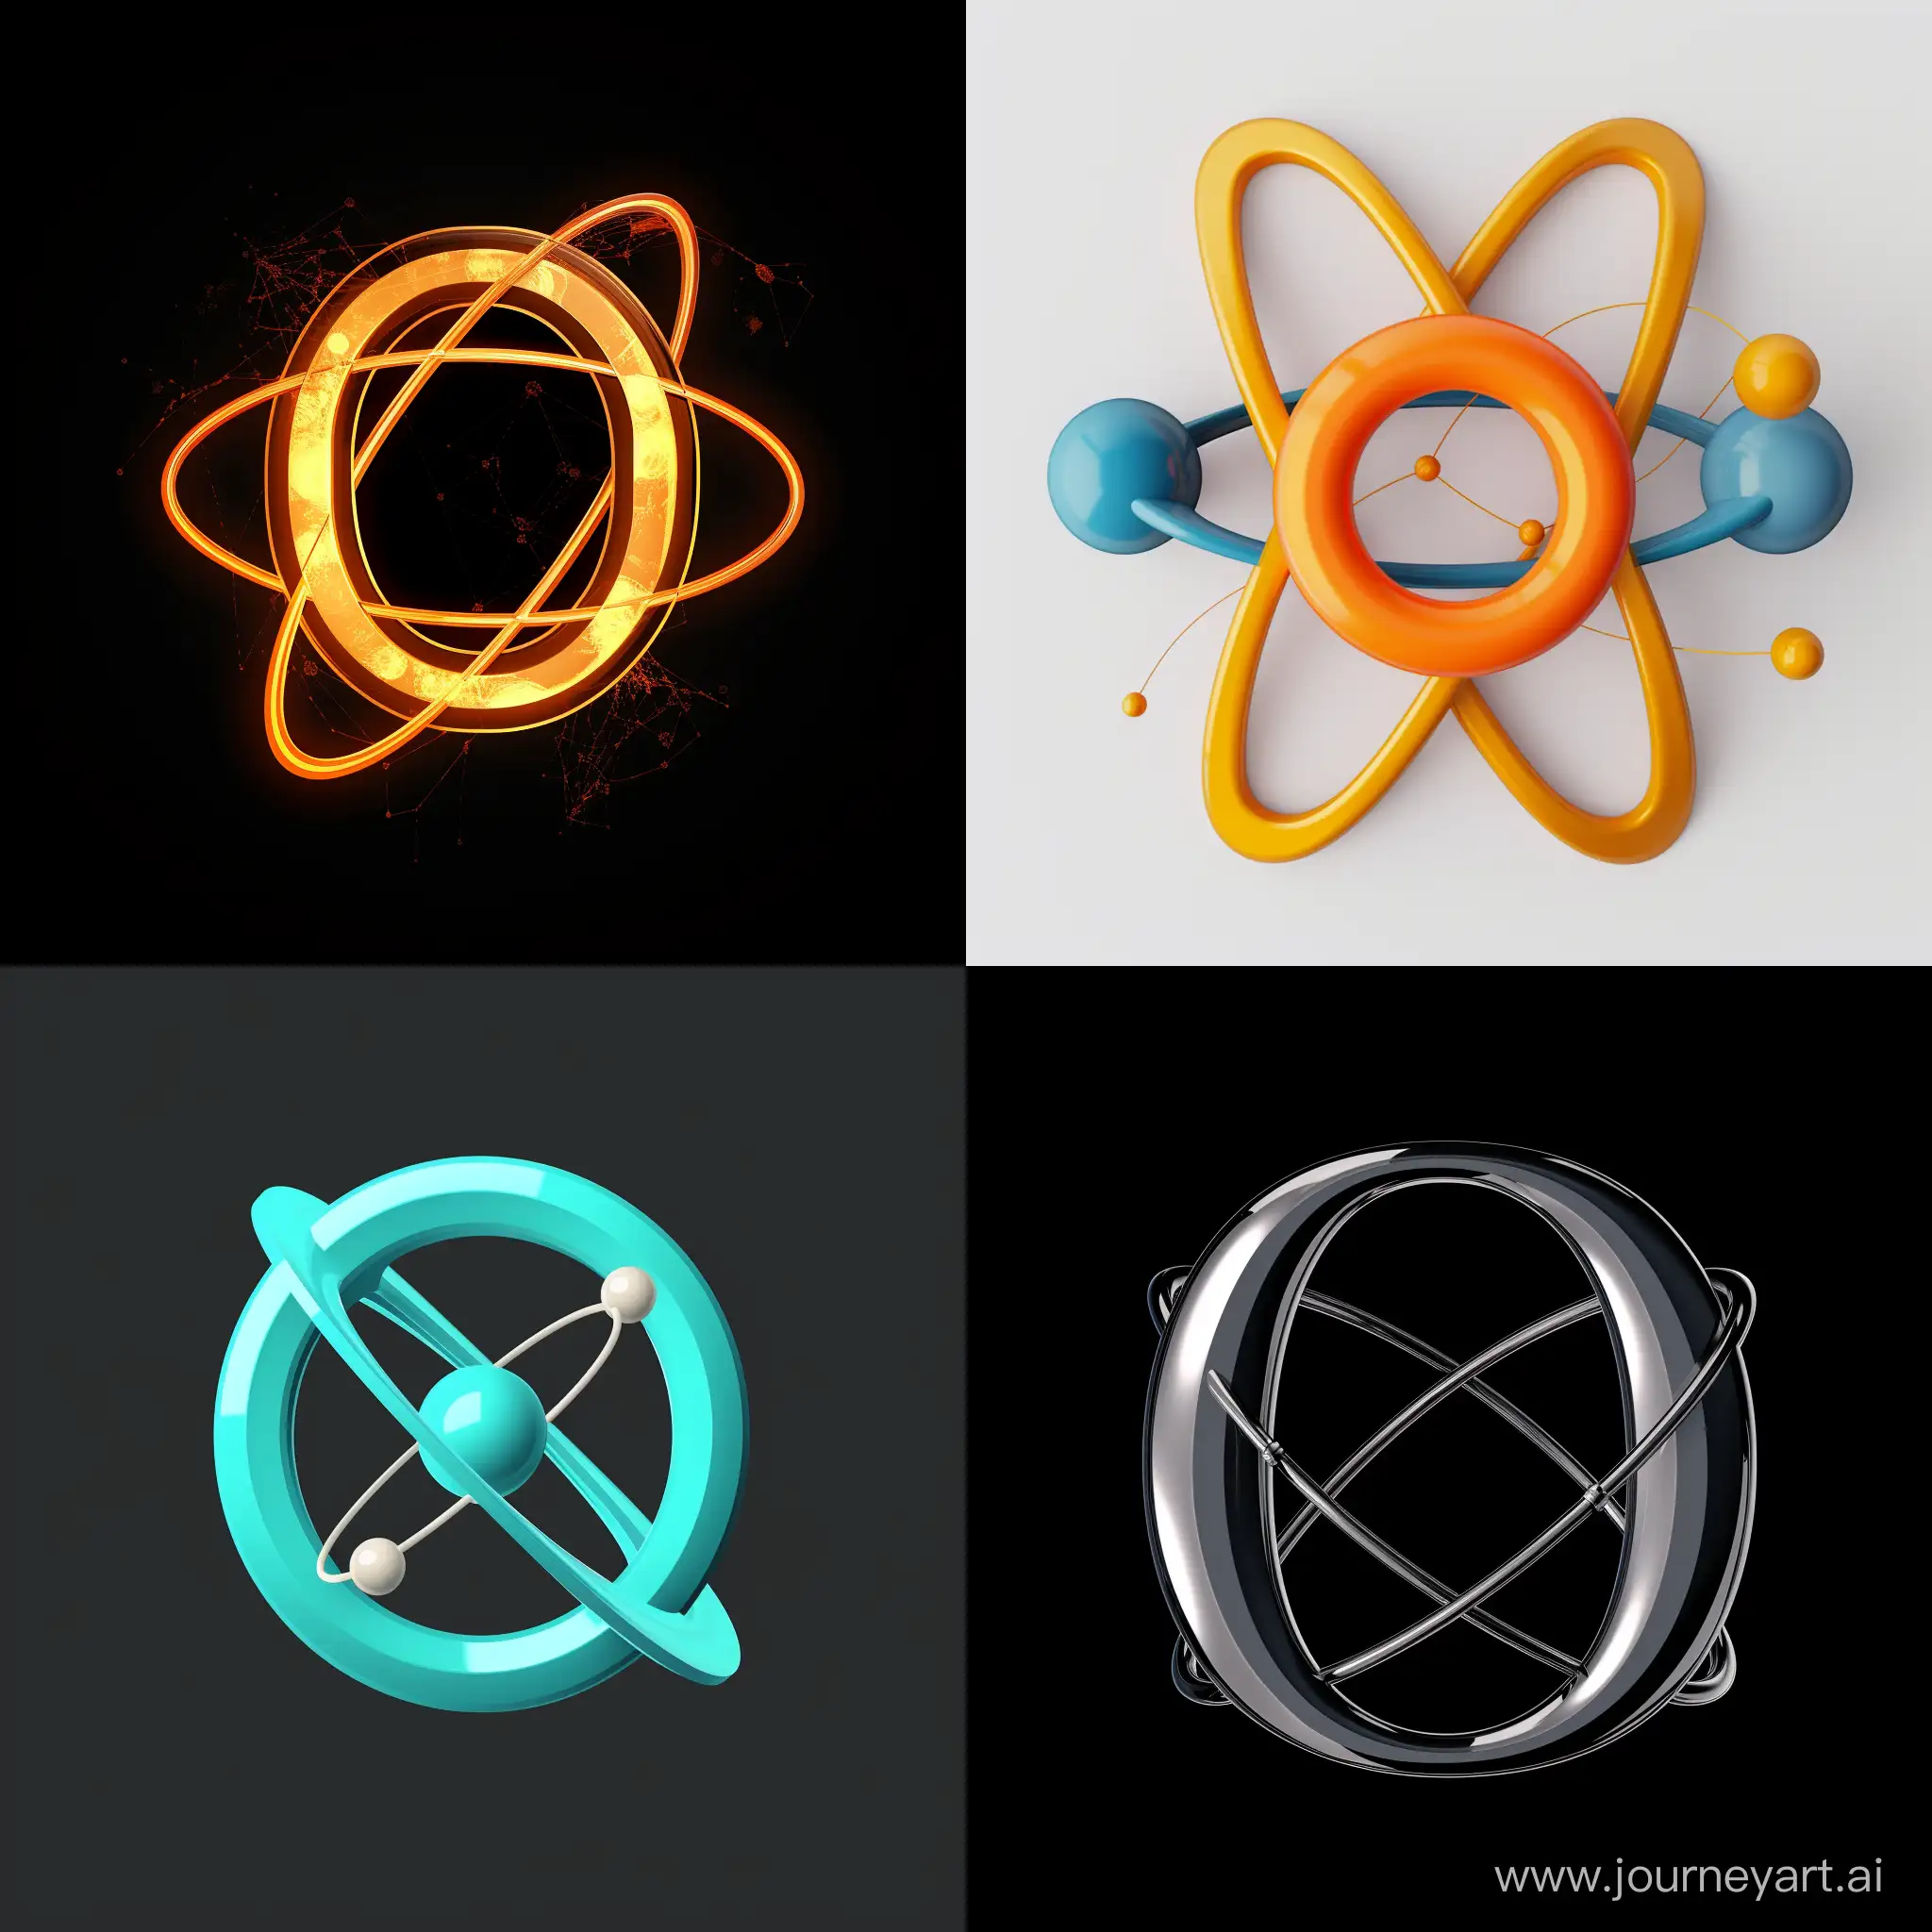 Letter O in the form of an atom, logo